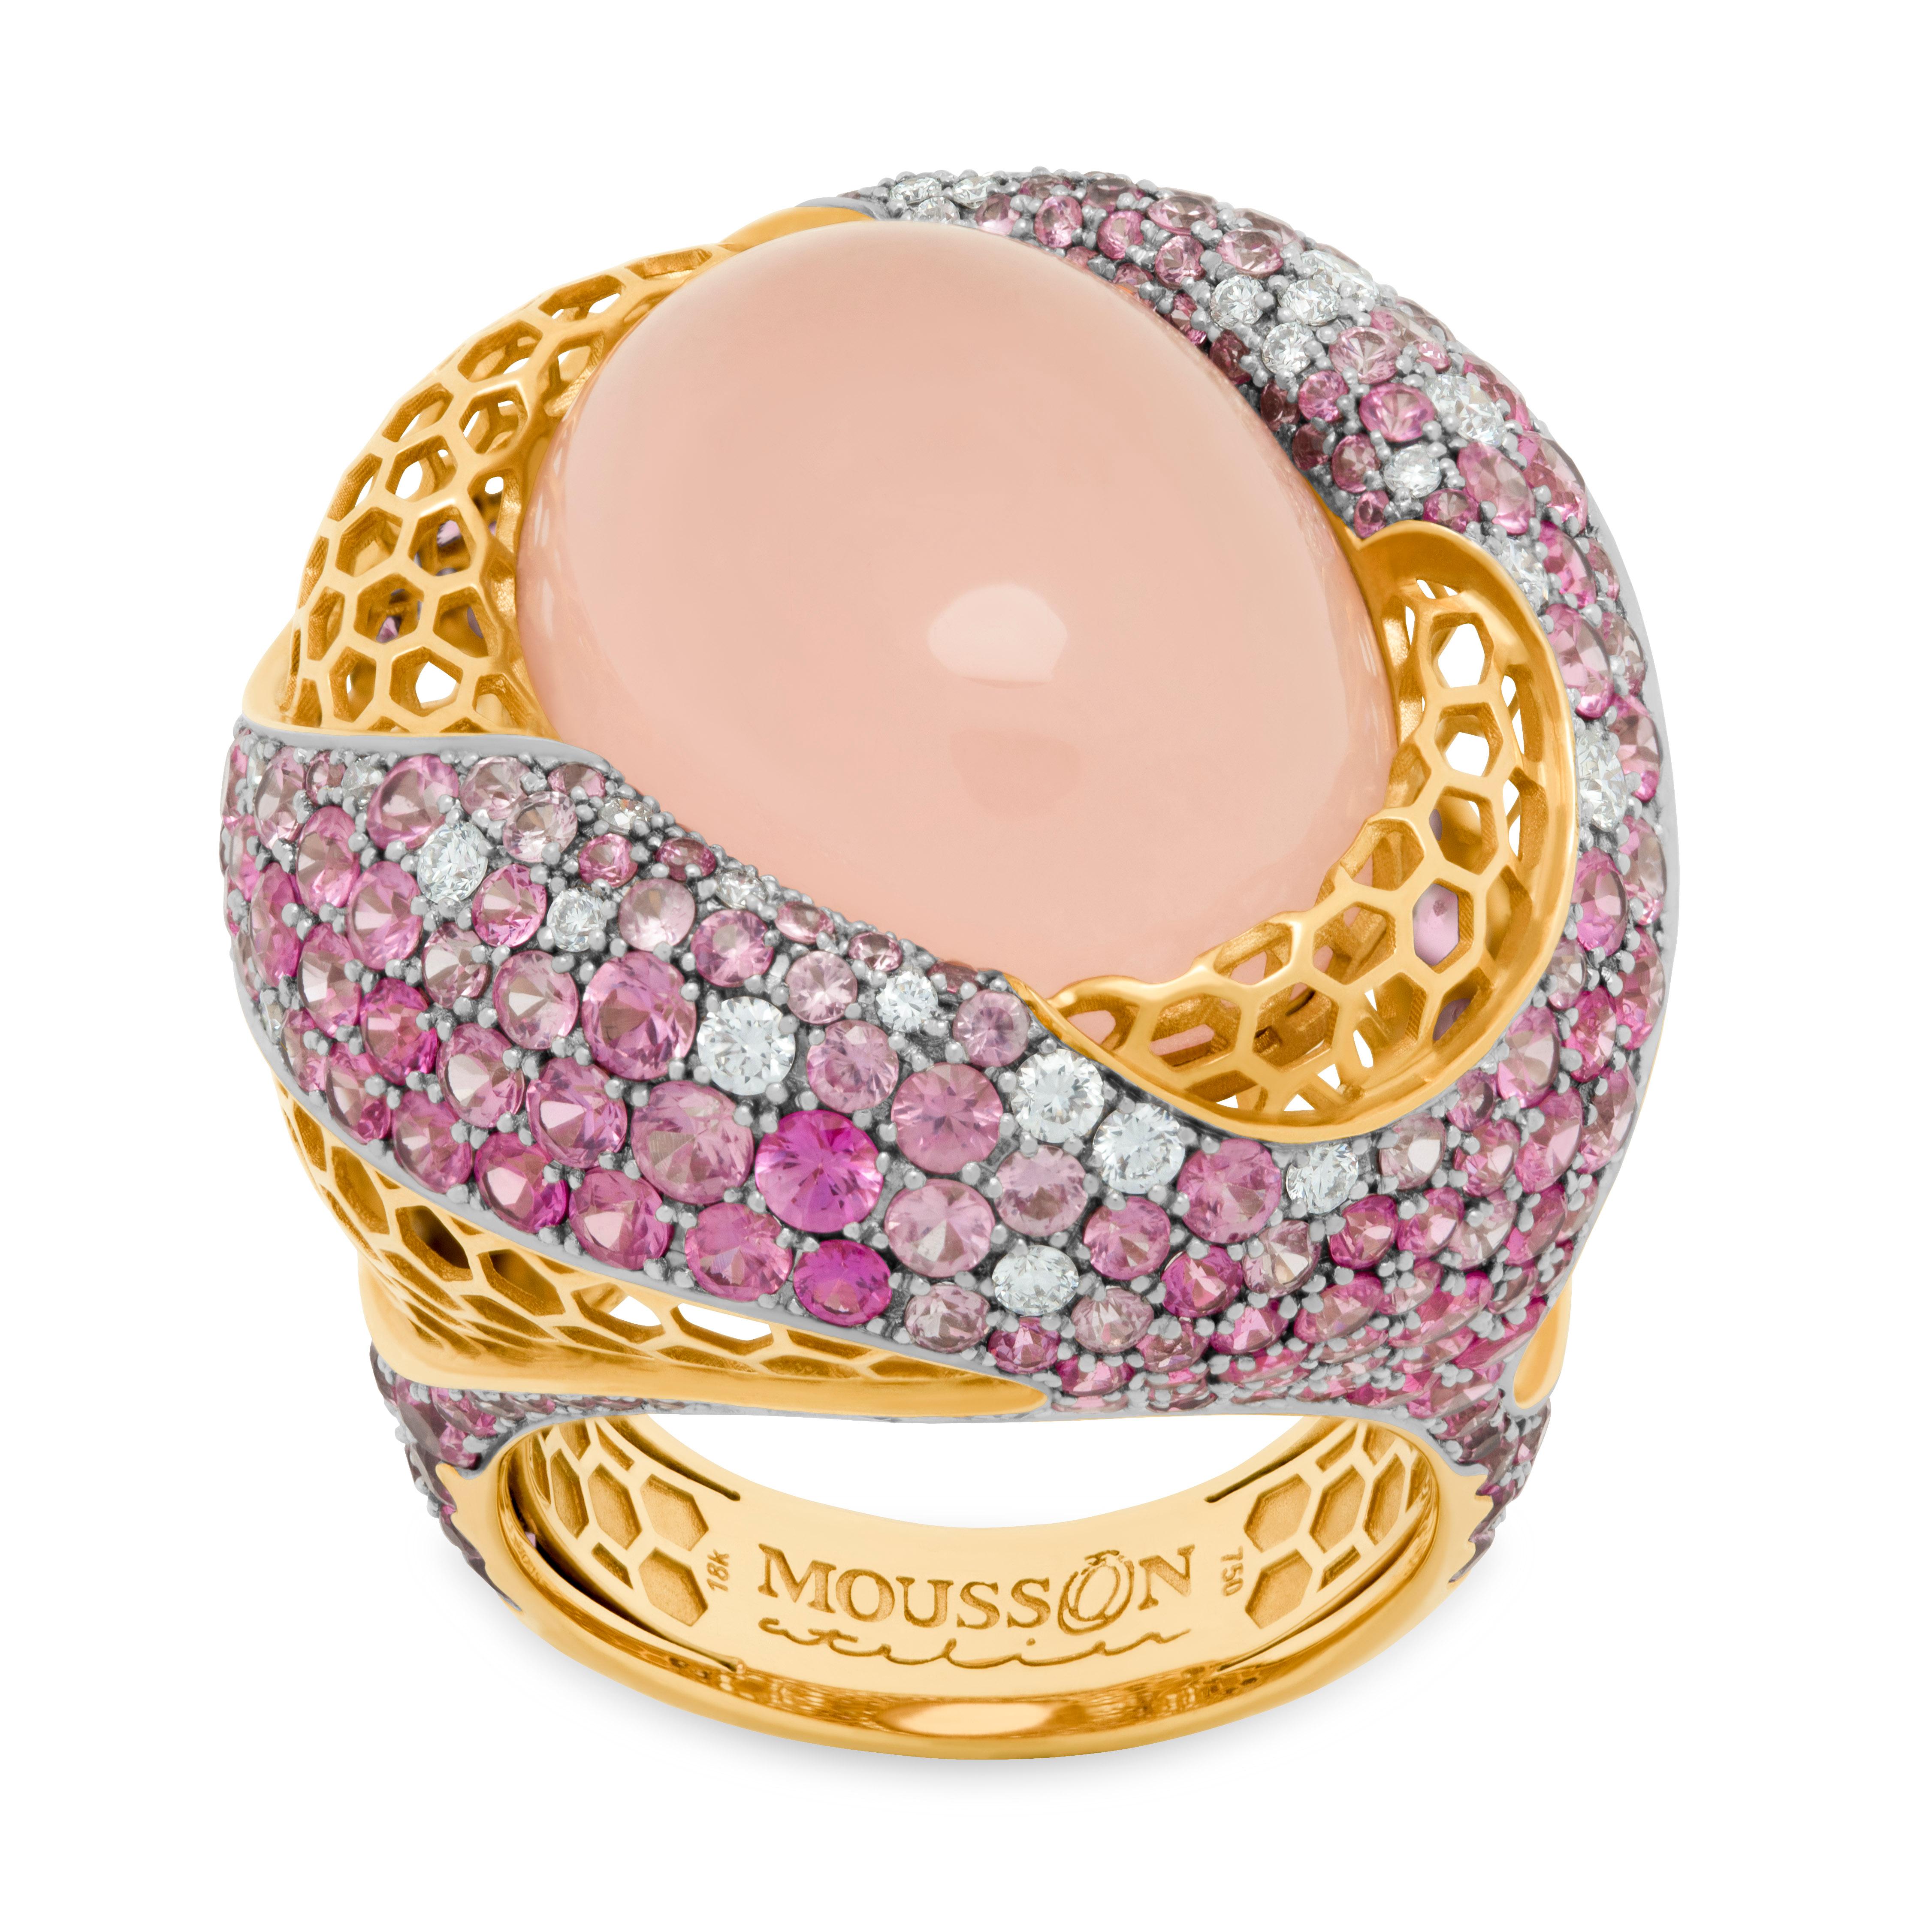 Rose Quartz 17.04 Carat Diamonds Pink Sapphires 18 Karat Yellow Gold Ring
What kind of patterns has not been created by nature. Honeycomb is one of them. Take a look at our 18 Karat Yellow Gold Ring from the New Age collection, it perfectly follows